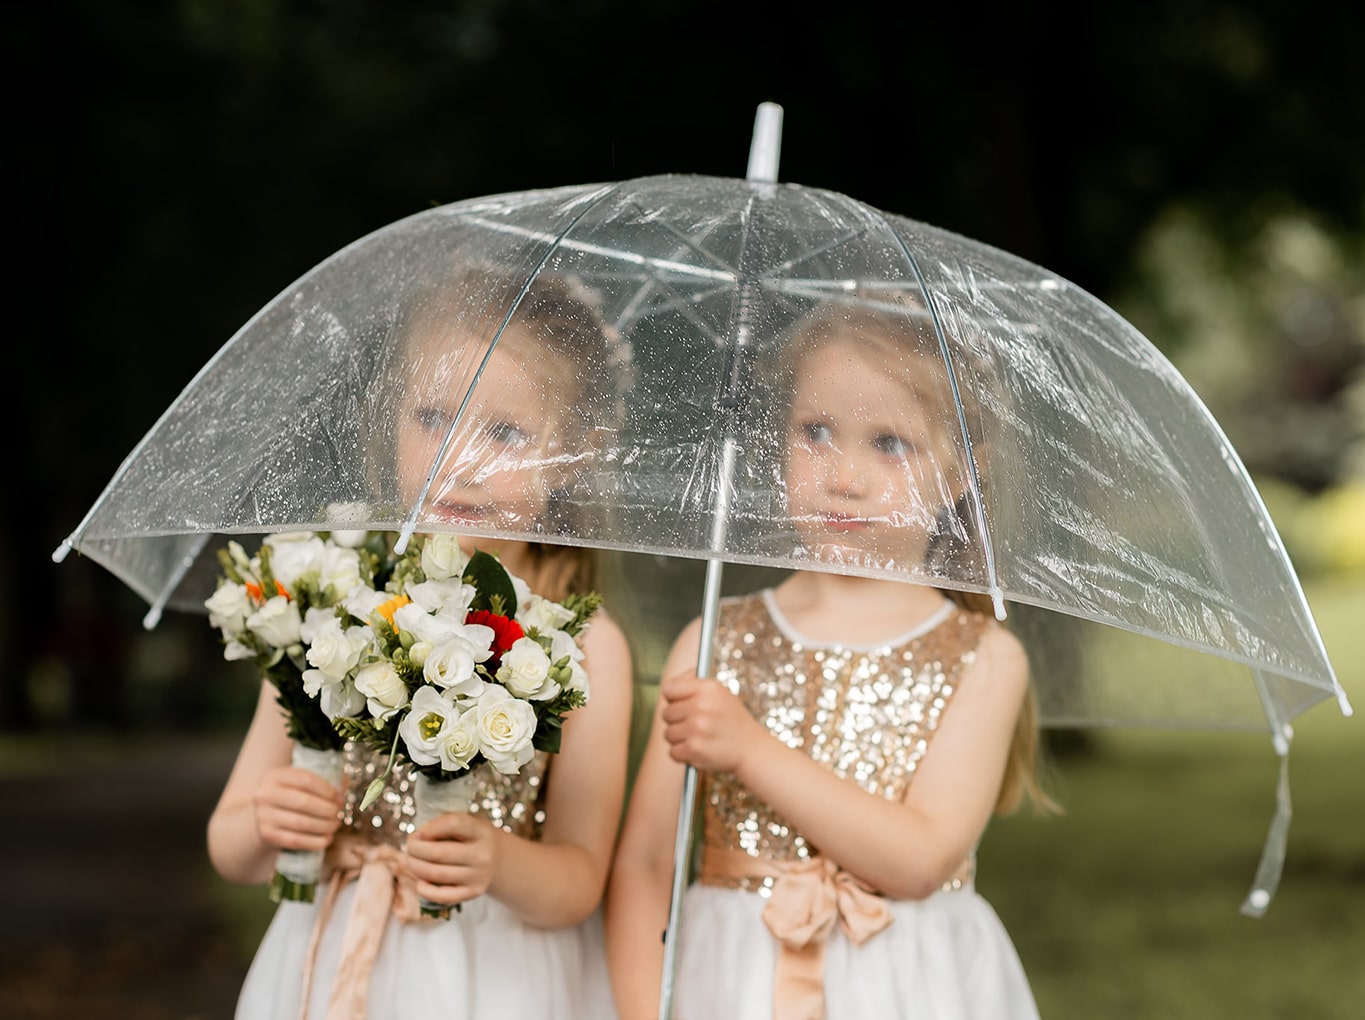 Cute photo of twin girl bridesmaids sharing a transparent umbrella in the rain, holding a bouquet of flowers